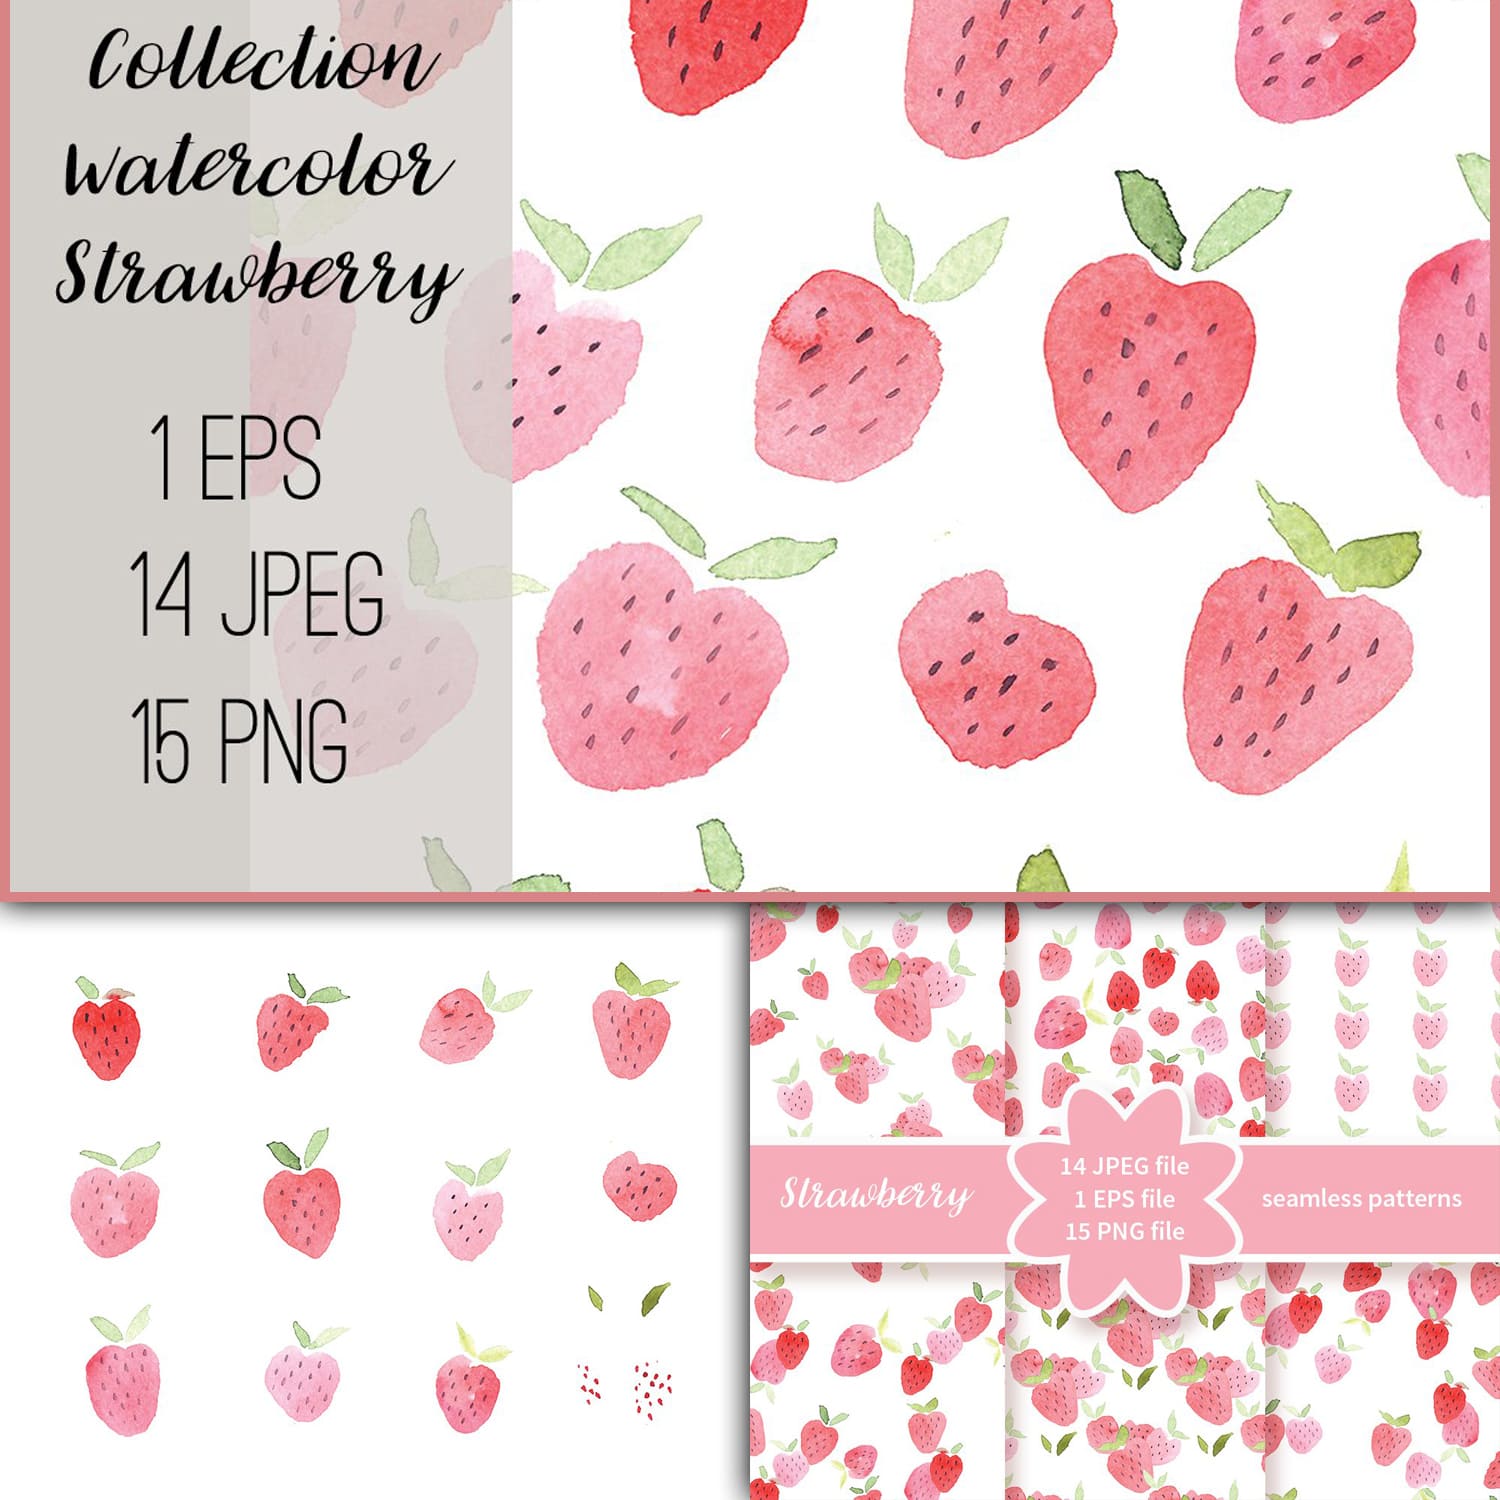 A collection of watercolor strawberries in PNG, JPEG and EPS format.